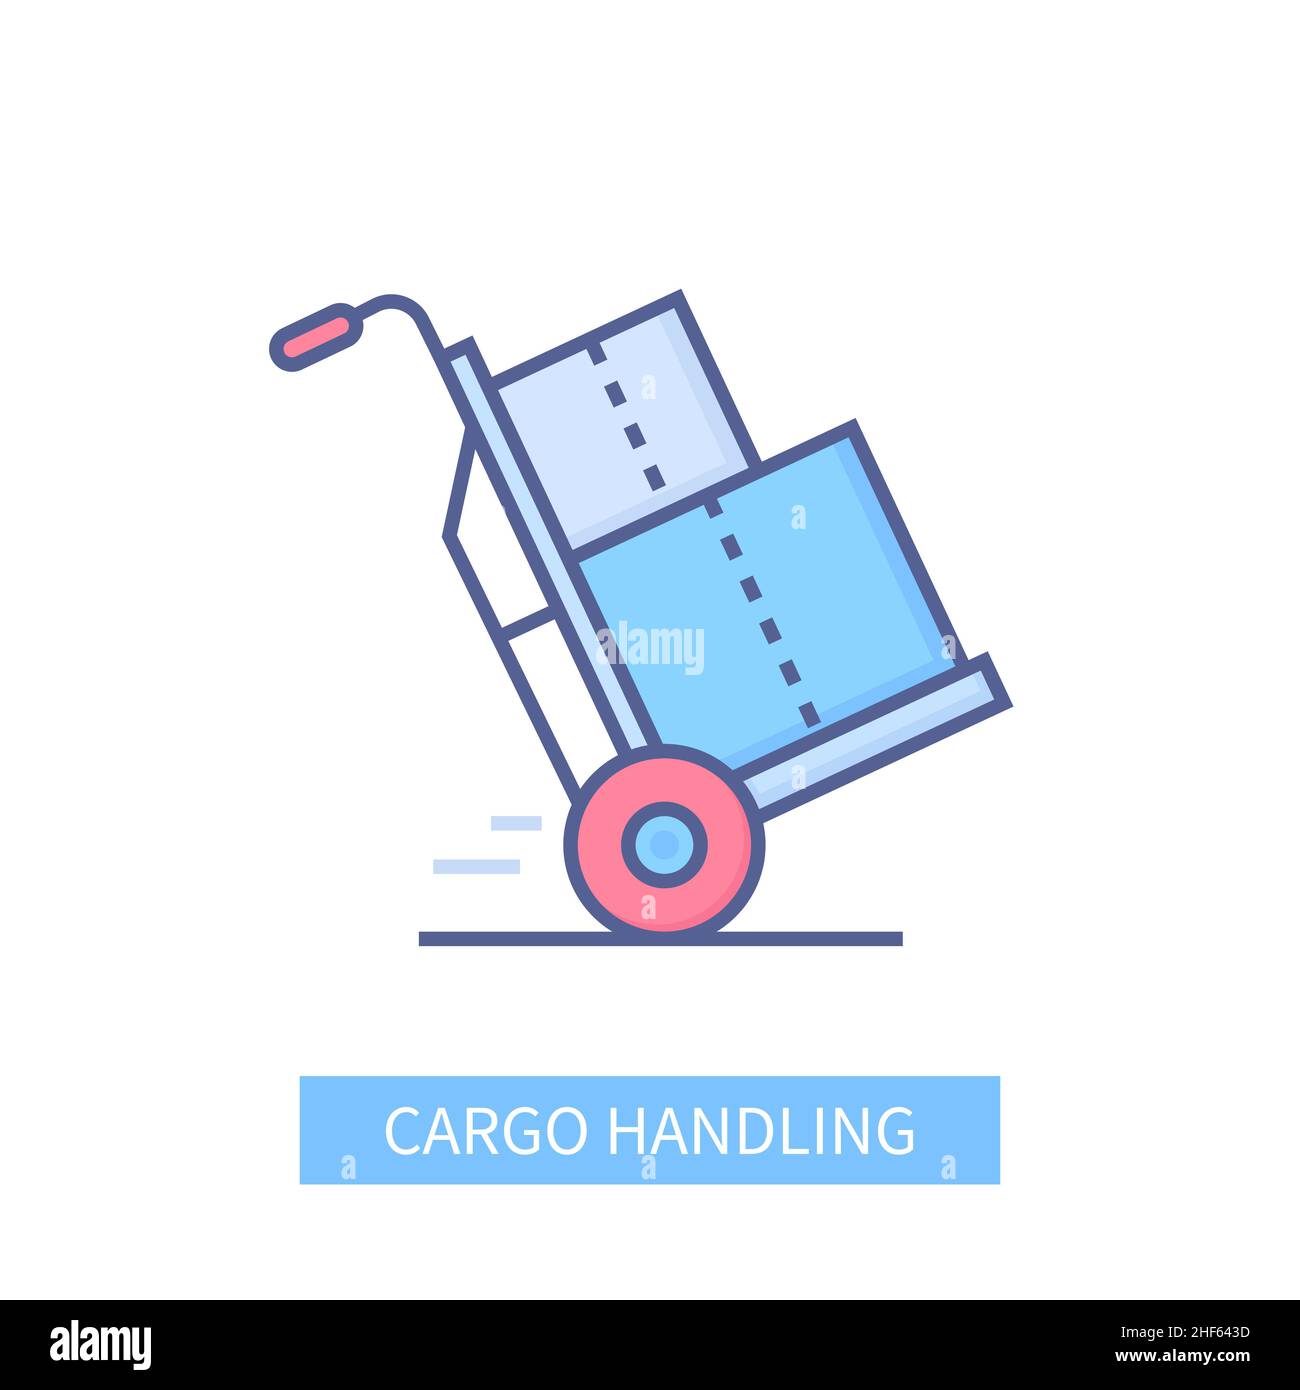 Cargo handling - modern colored line design style icon on white background. Neat detailed image of trolley on wheels with two boxes on top. Transporta Stock Vector